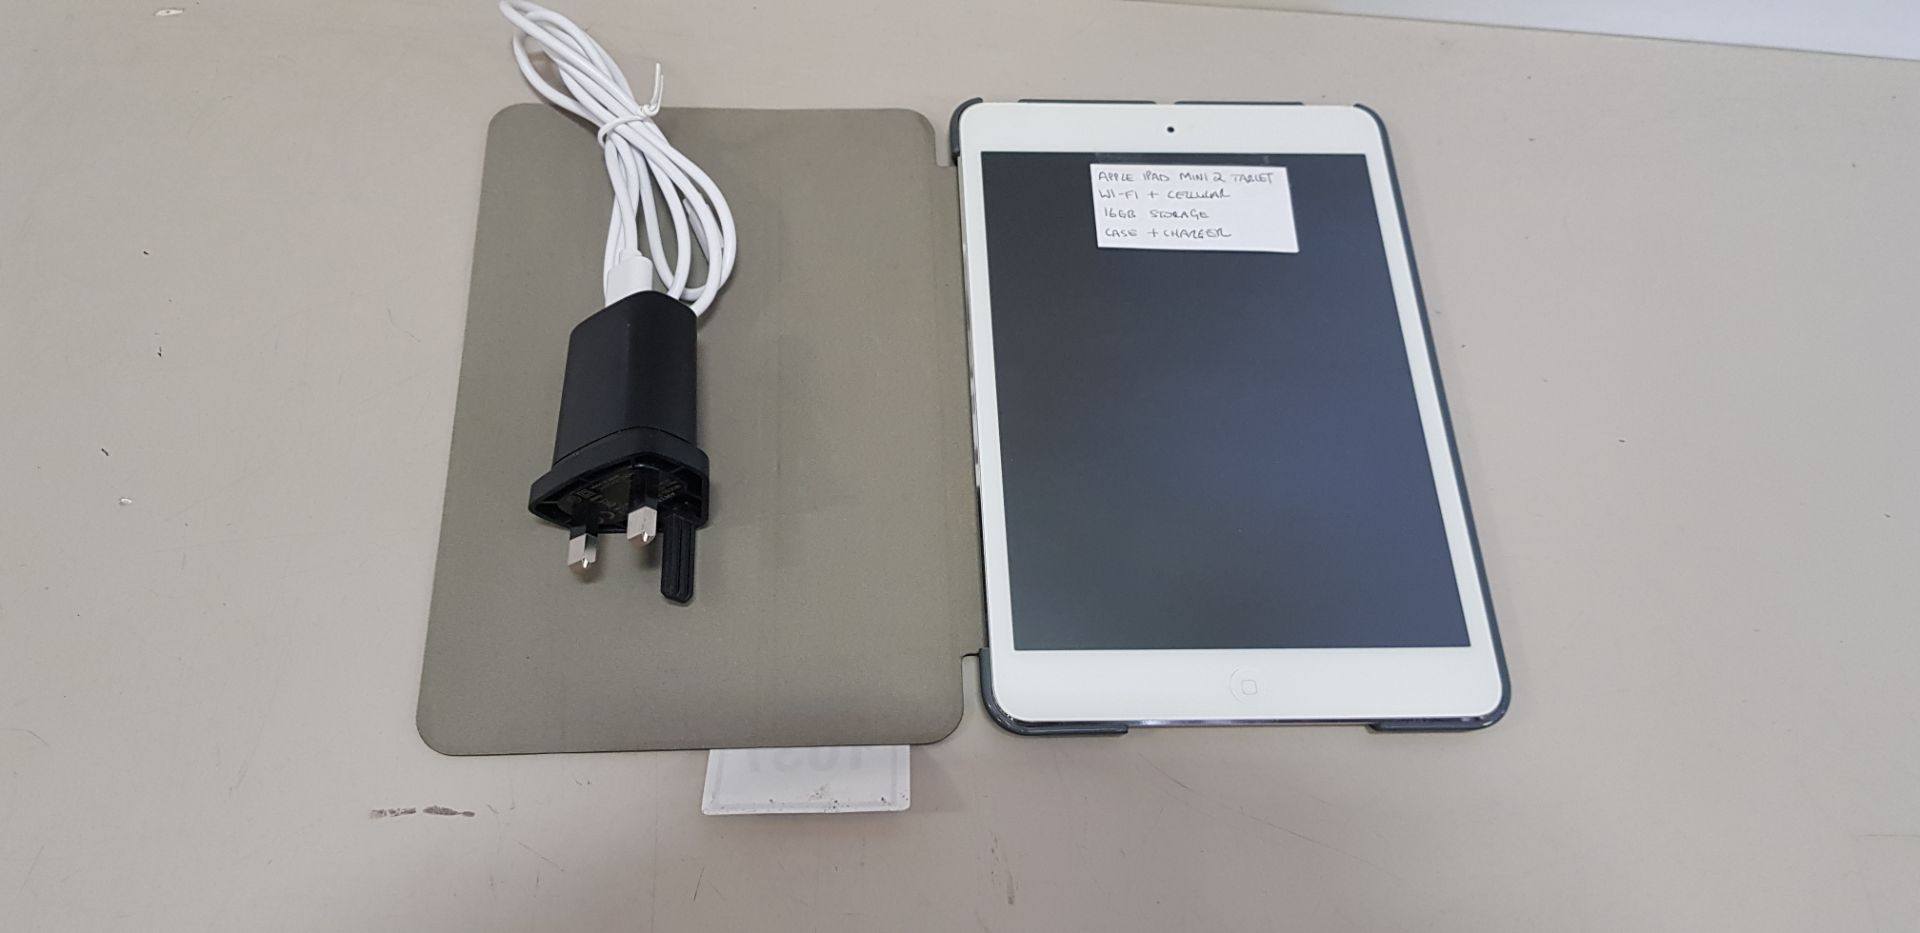 APPLE IPAD MINI 2 TABLET - WIFI AND CELLULAR - 16 GB STORAGE - COMES WITH CHARGER AND PROTECTIVE